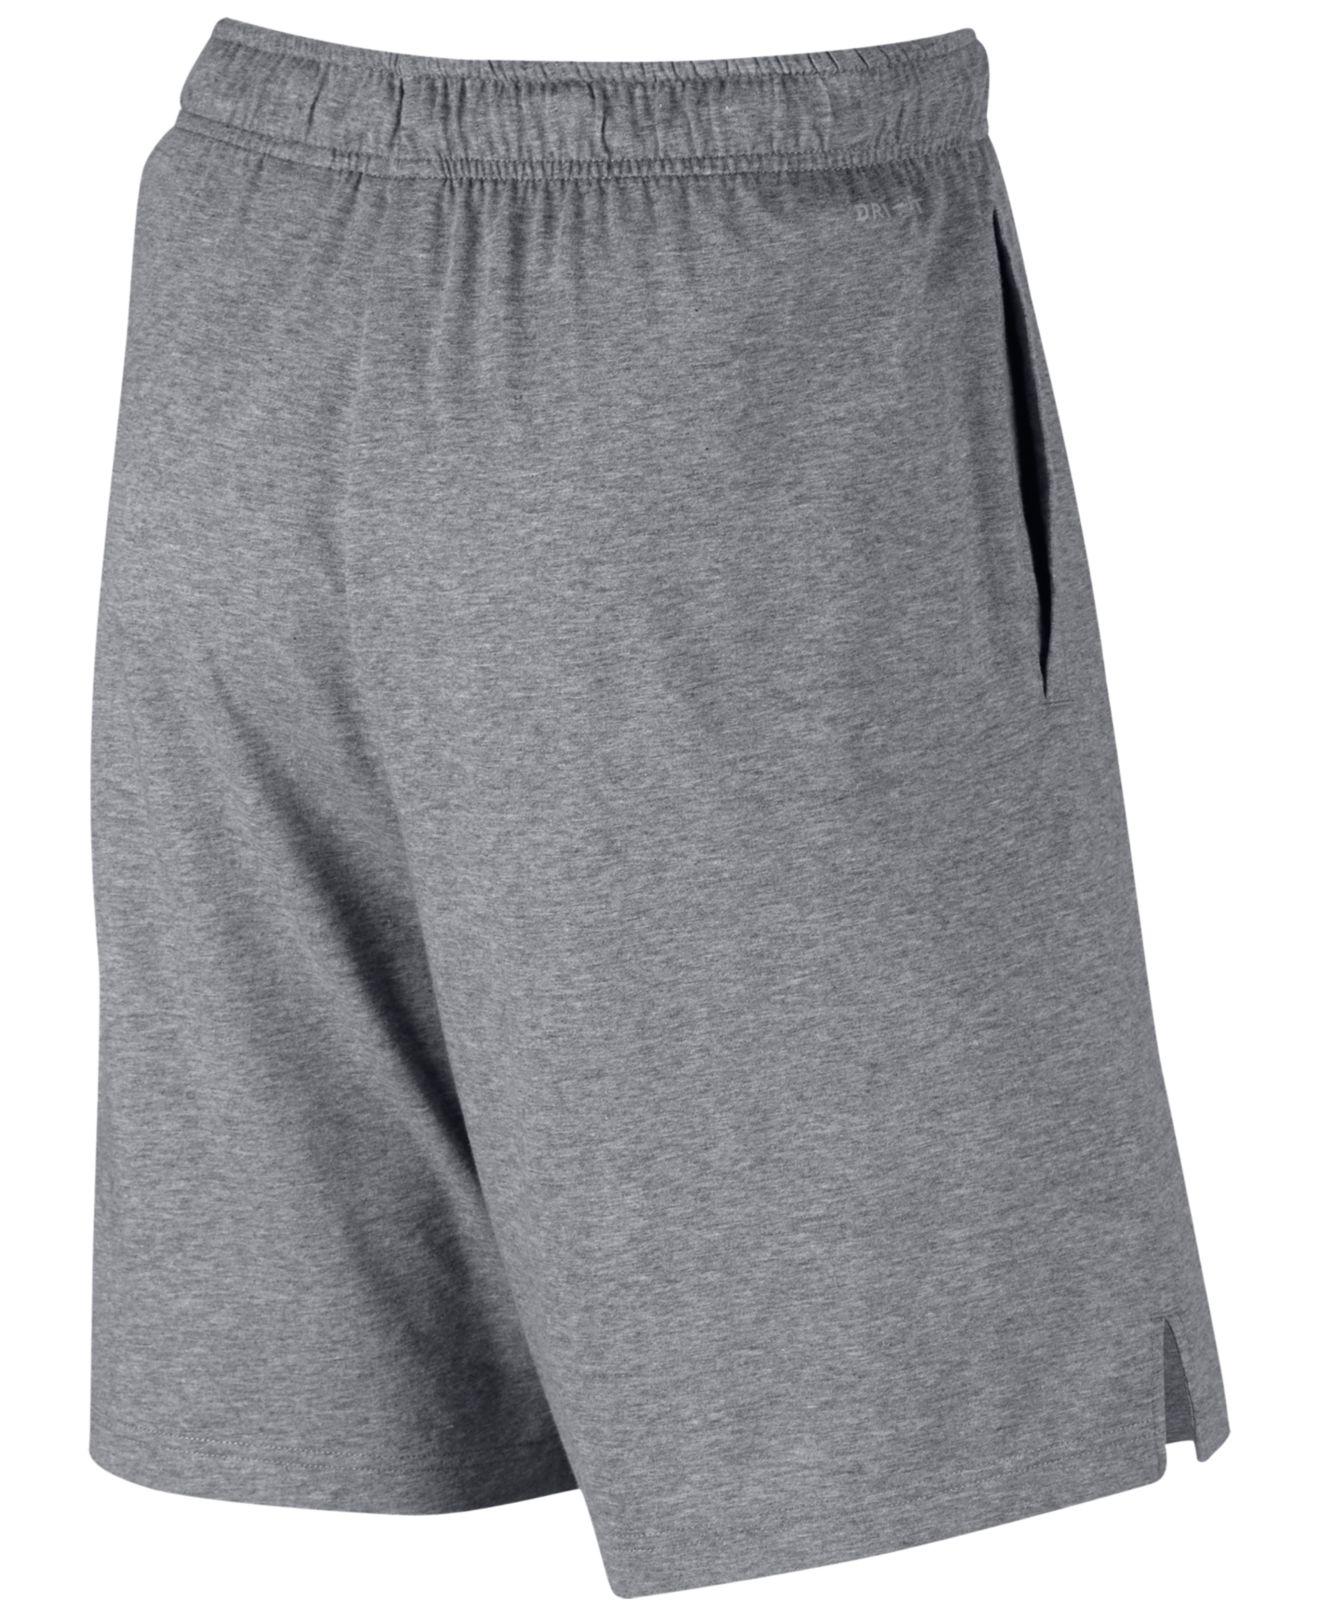 Nike Men's Dri-fit Cotton Jersey Training Shorts in Carbon Heather ...